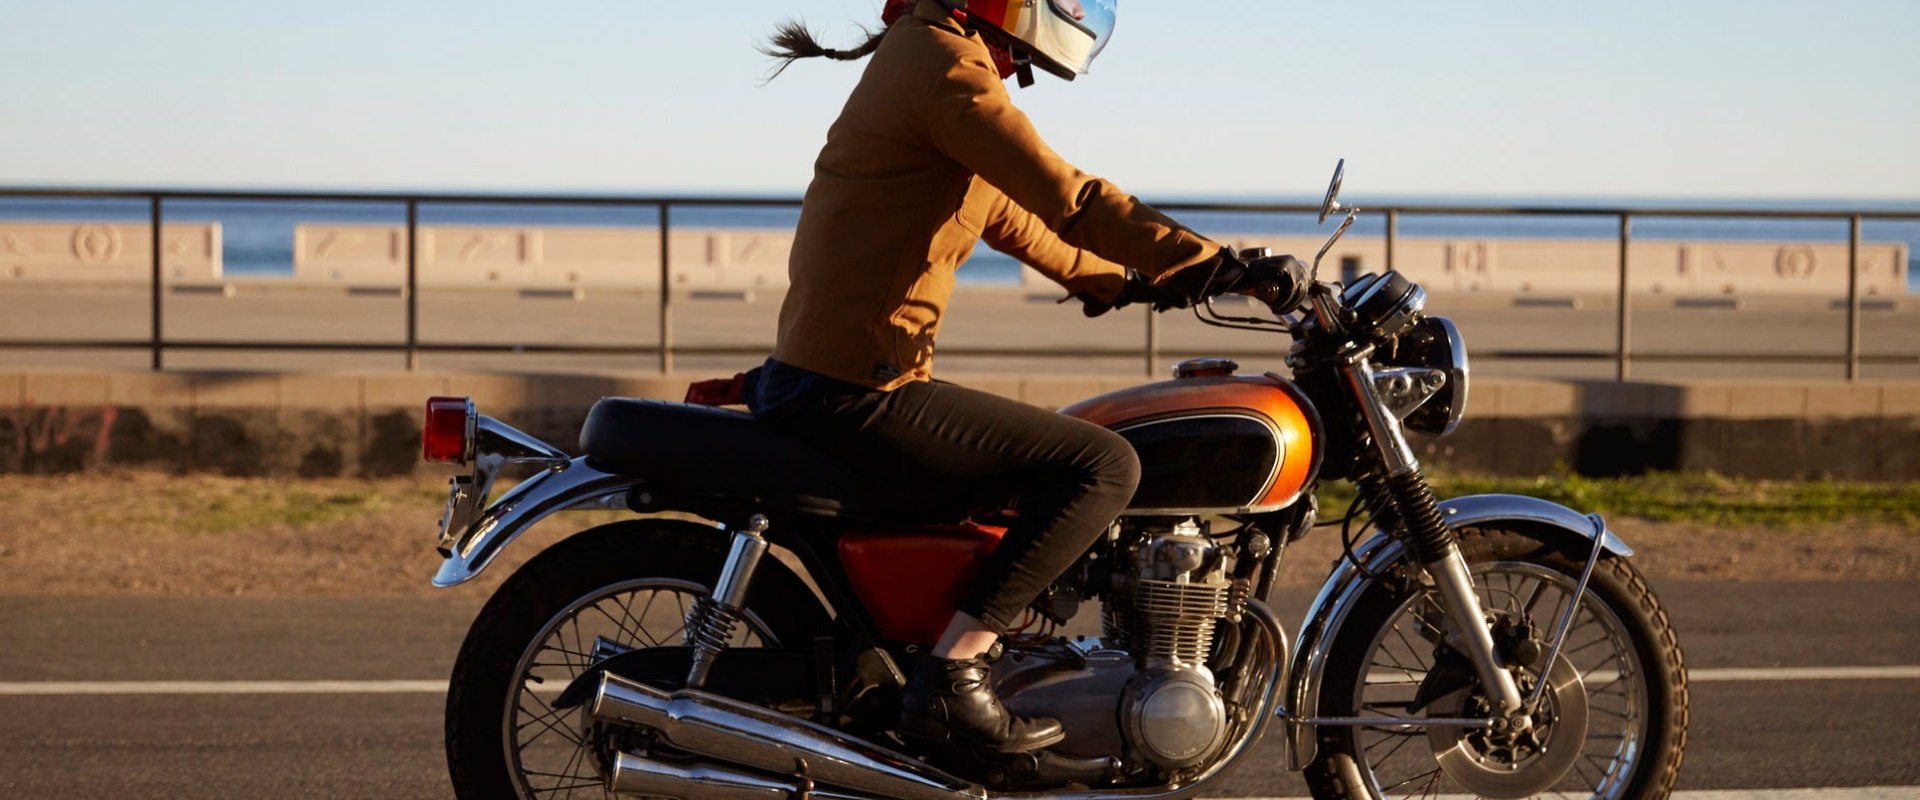 Inexpensive motorcycle insurance for new owners